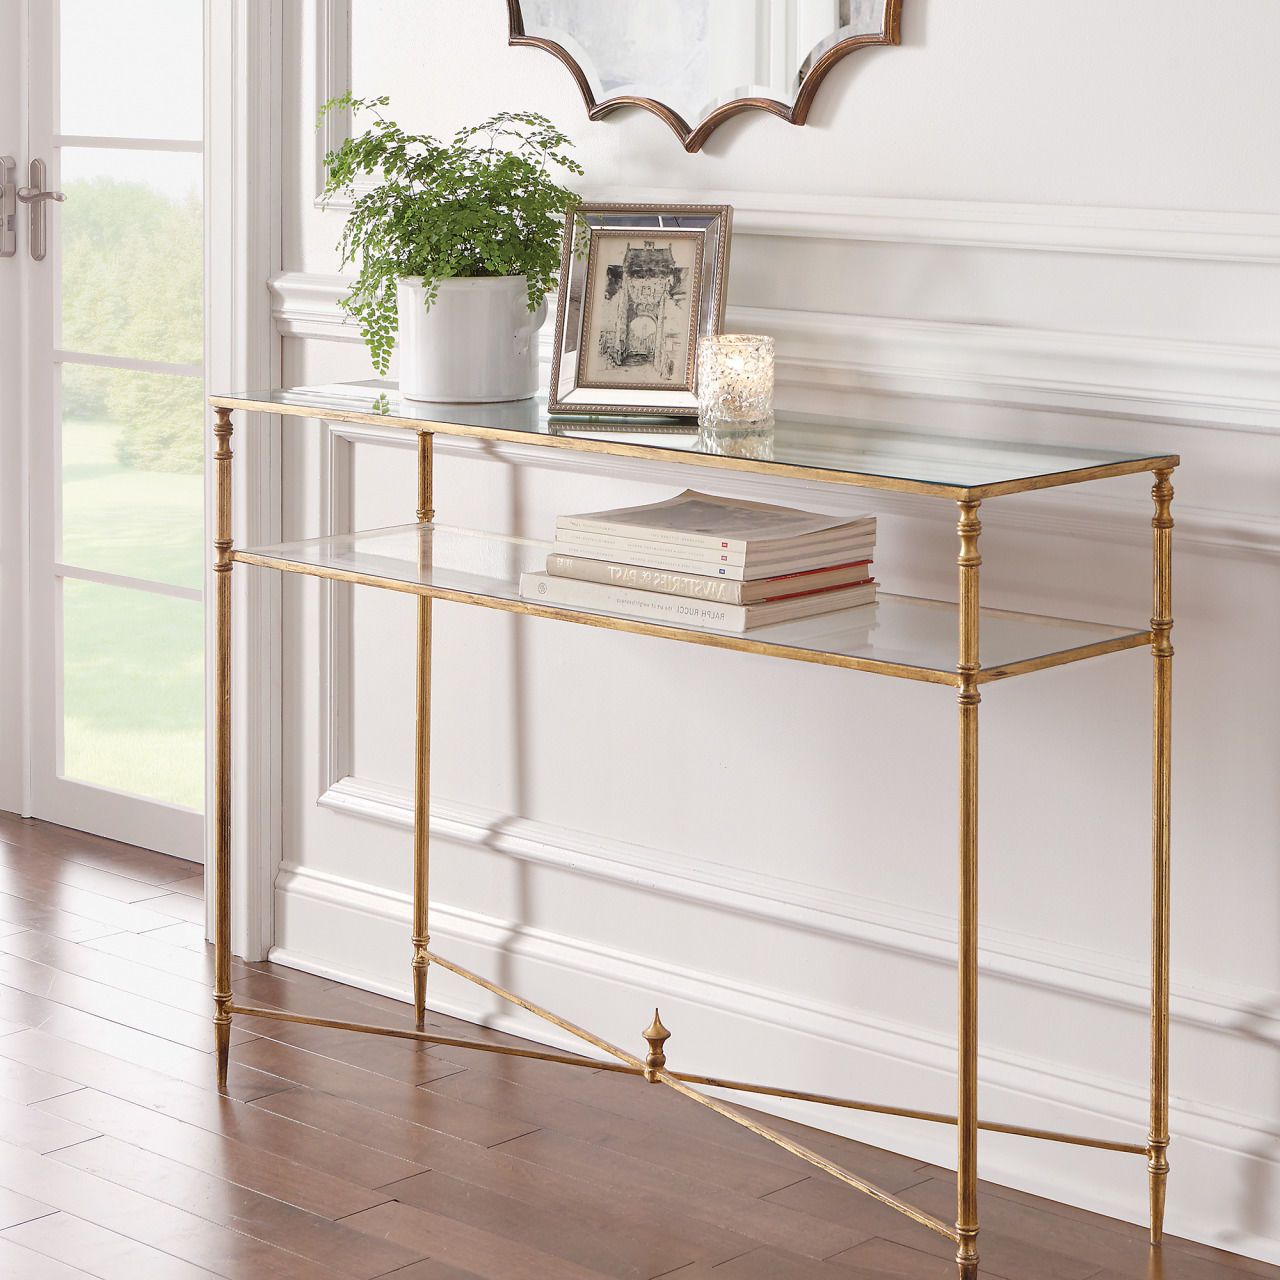 Gold Console Tables Regarding Most Up To Date Horchow Sofa Console Table Hollywood Regency Antique Gold (View 4 of 10)